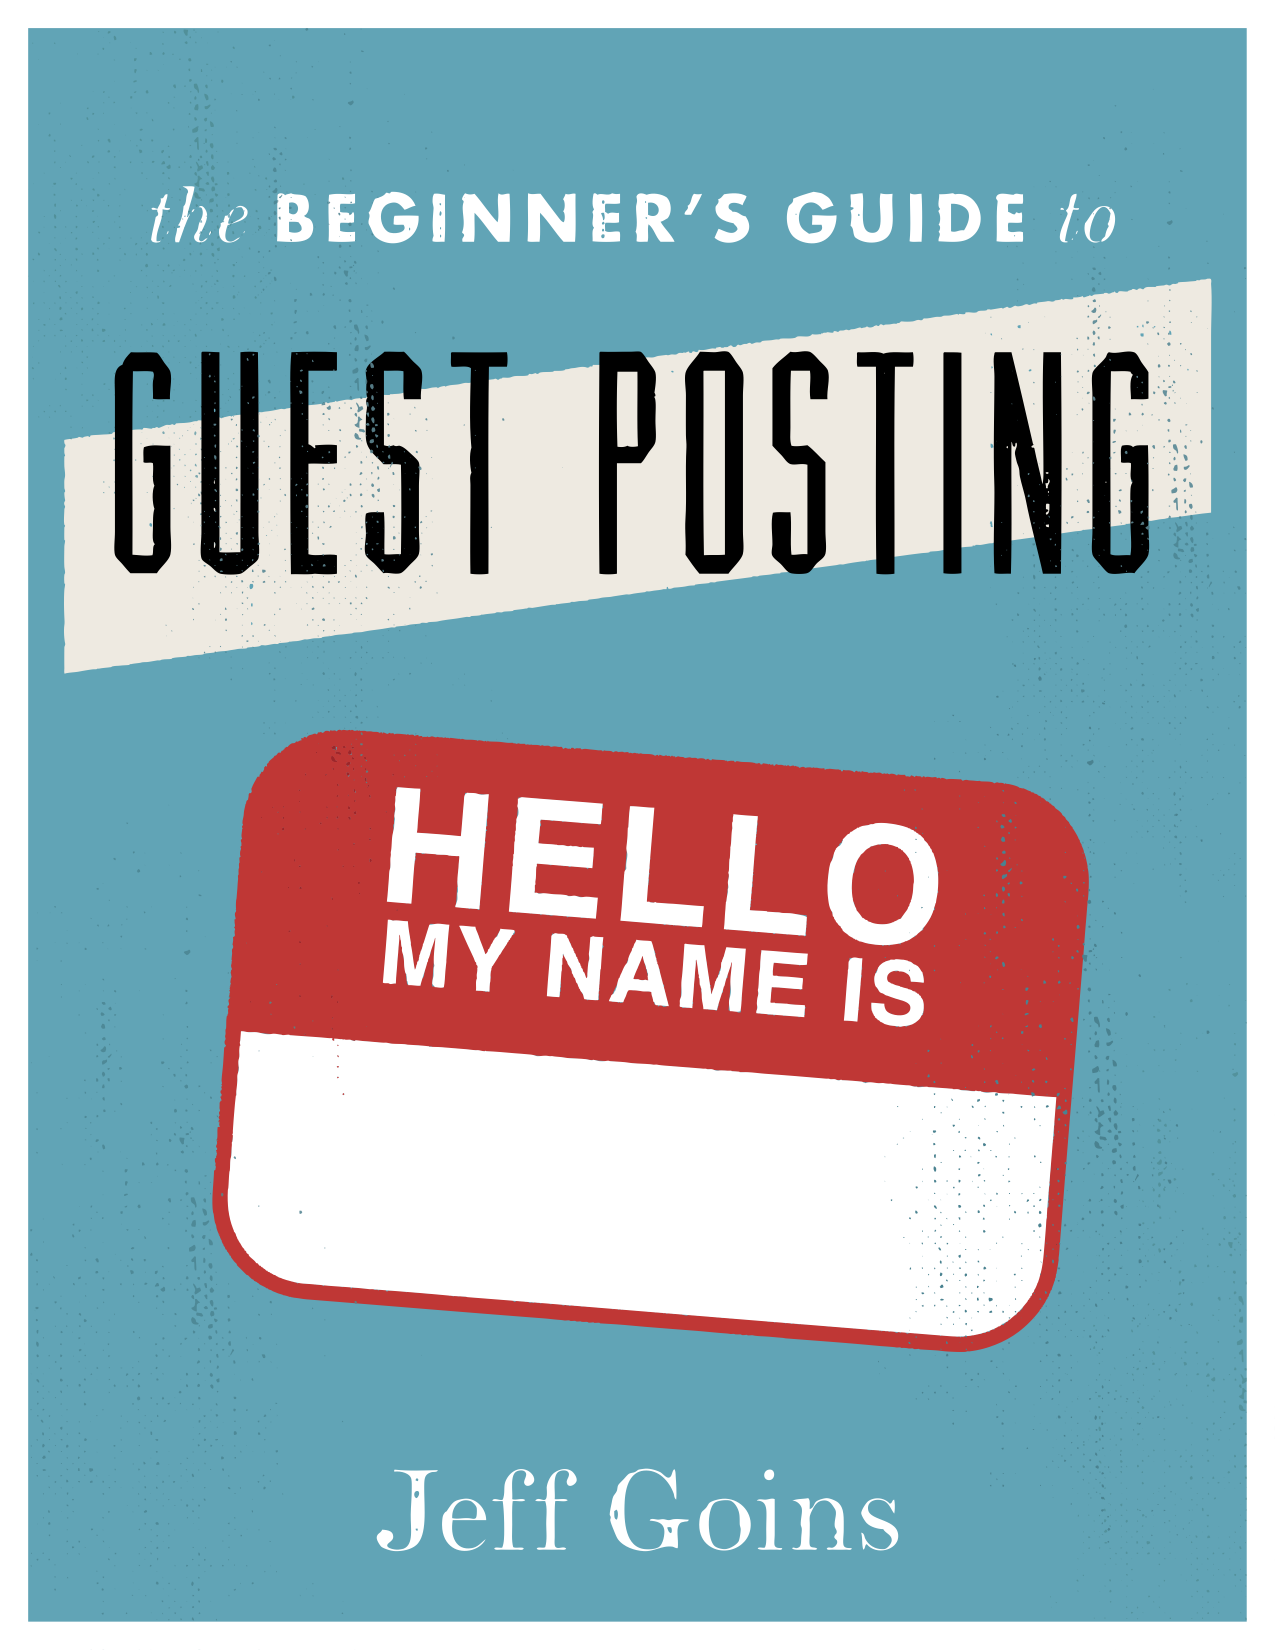 The Beginner's Guide to Guest Posting